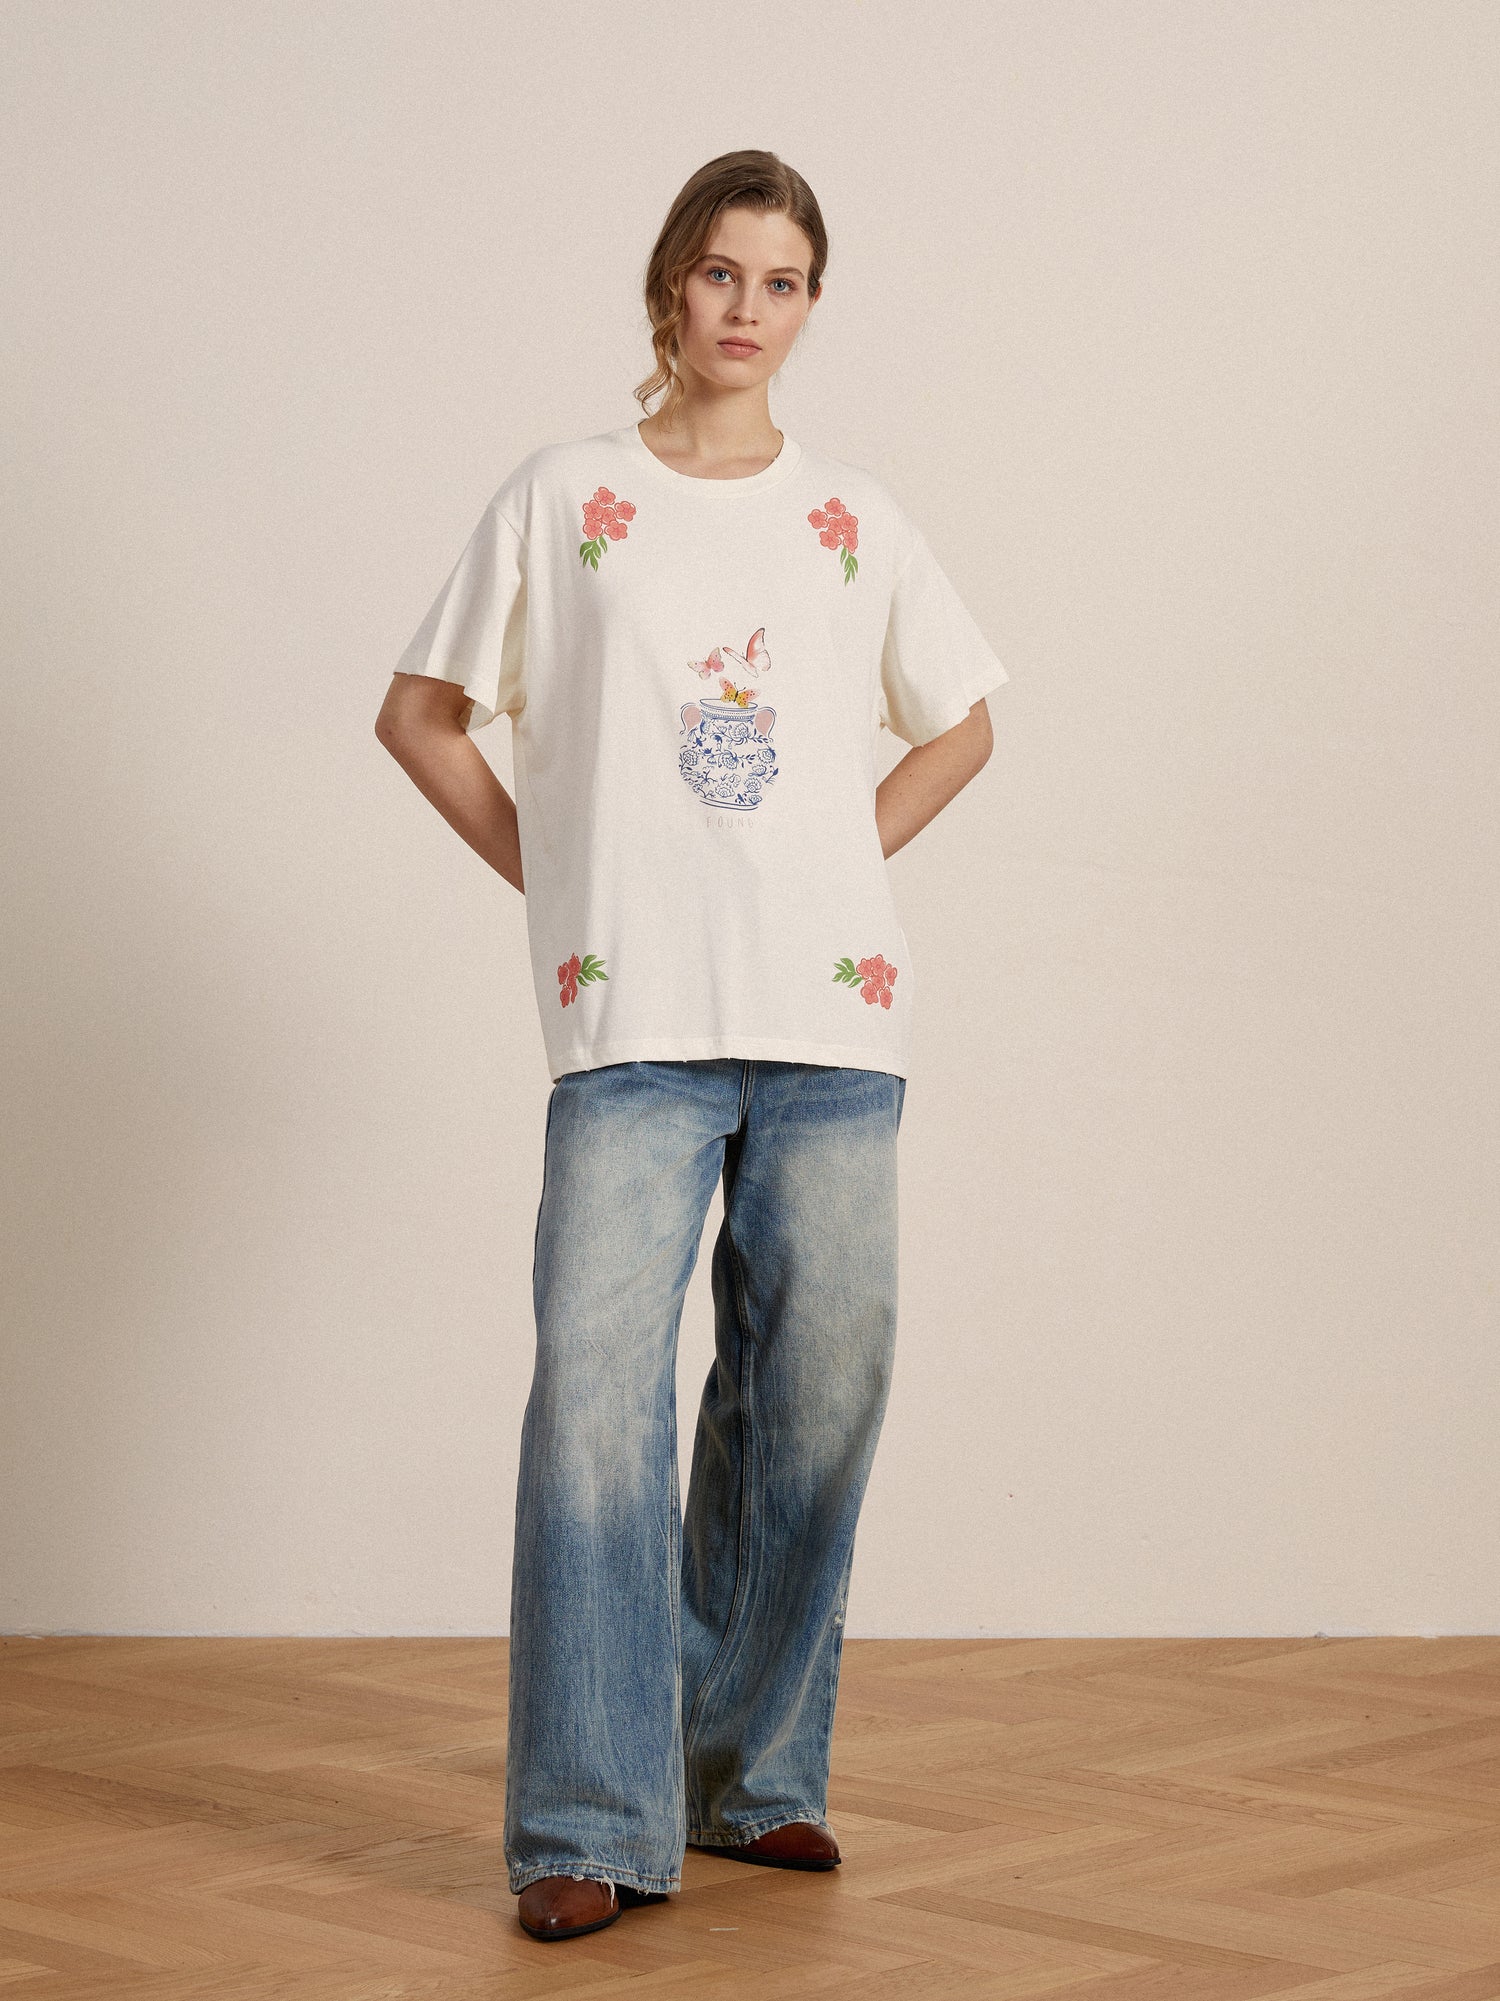 A woman wearing an embroidered Found Flower Pot Tee and lacy baggy jeans.